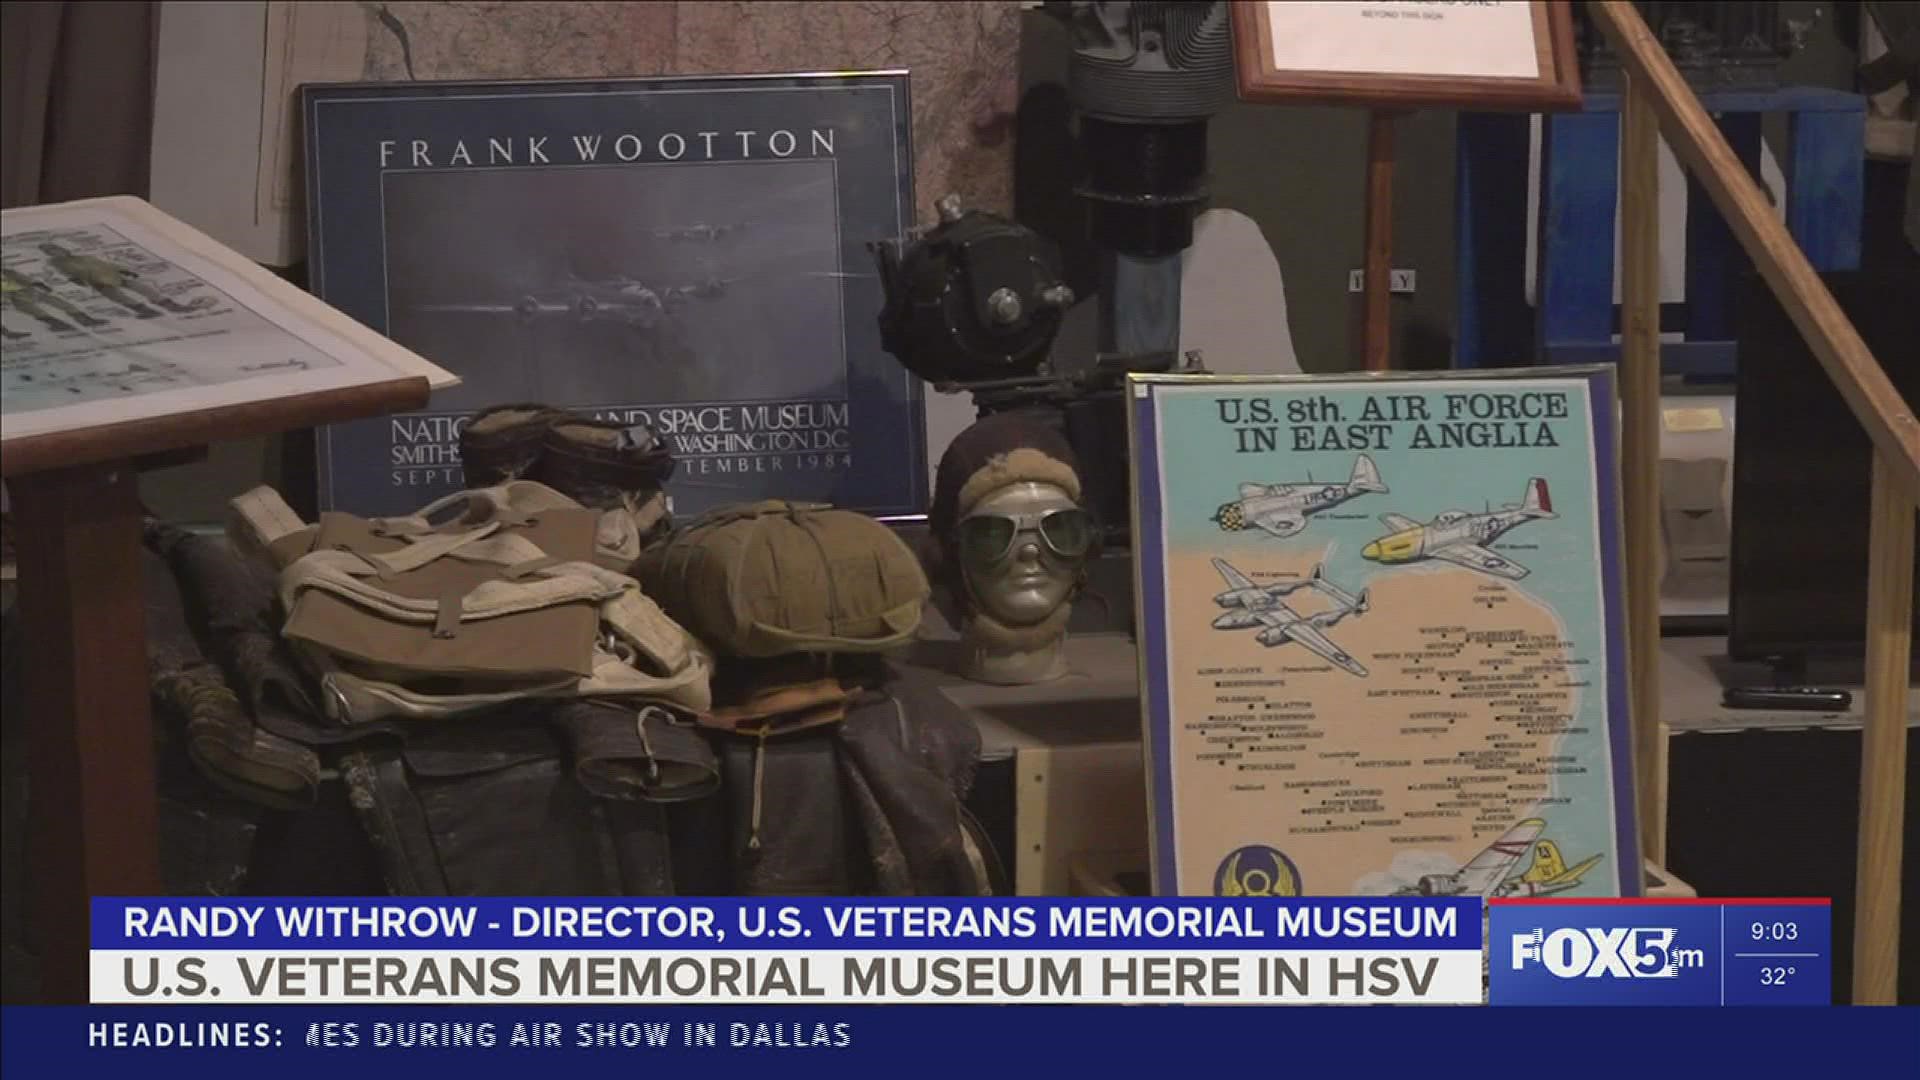 Did you know Huntsville has a U.S. Veterans Memorial Museum? Our Sedona Meadows takes a inside look on what it has to offer.